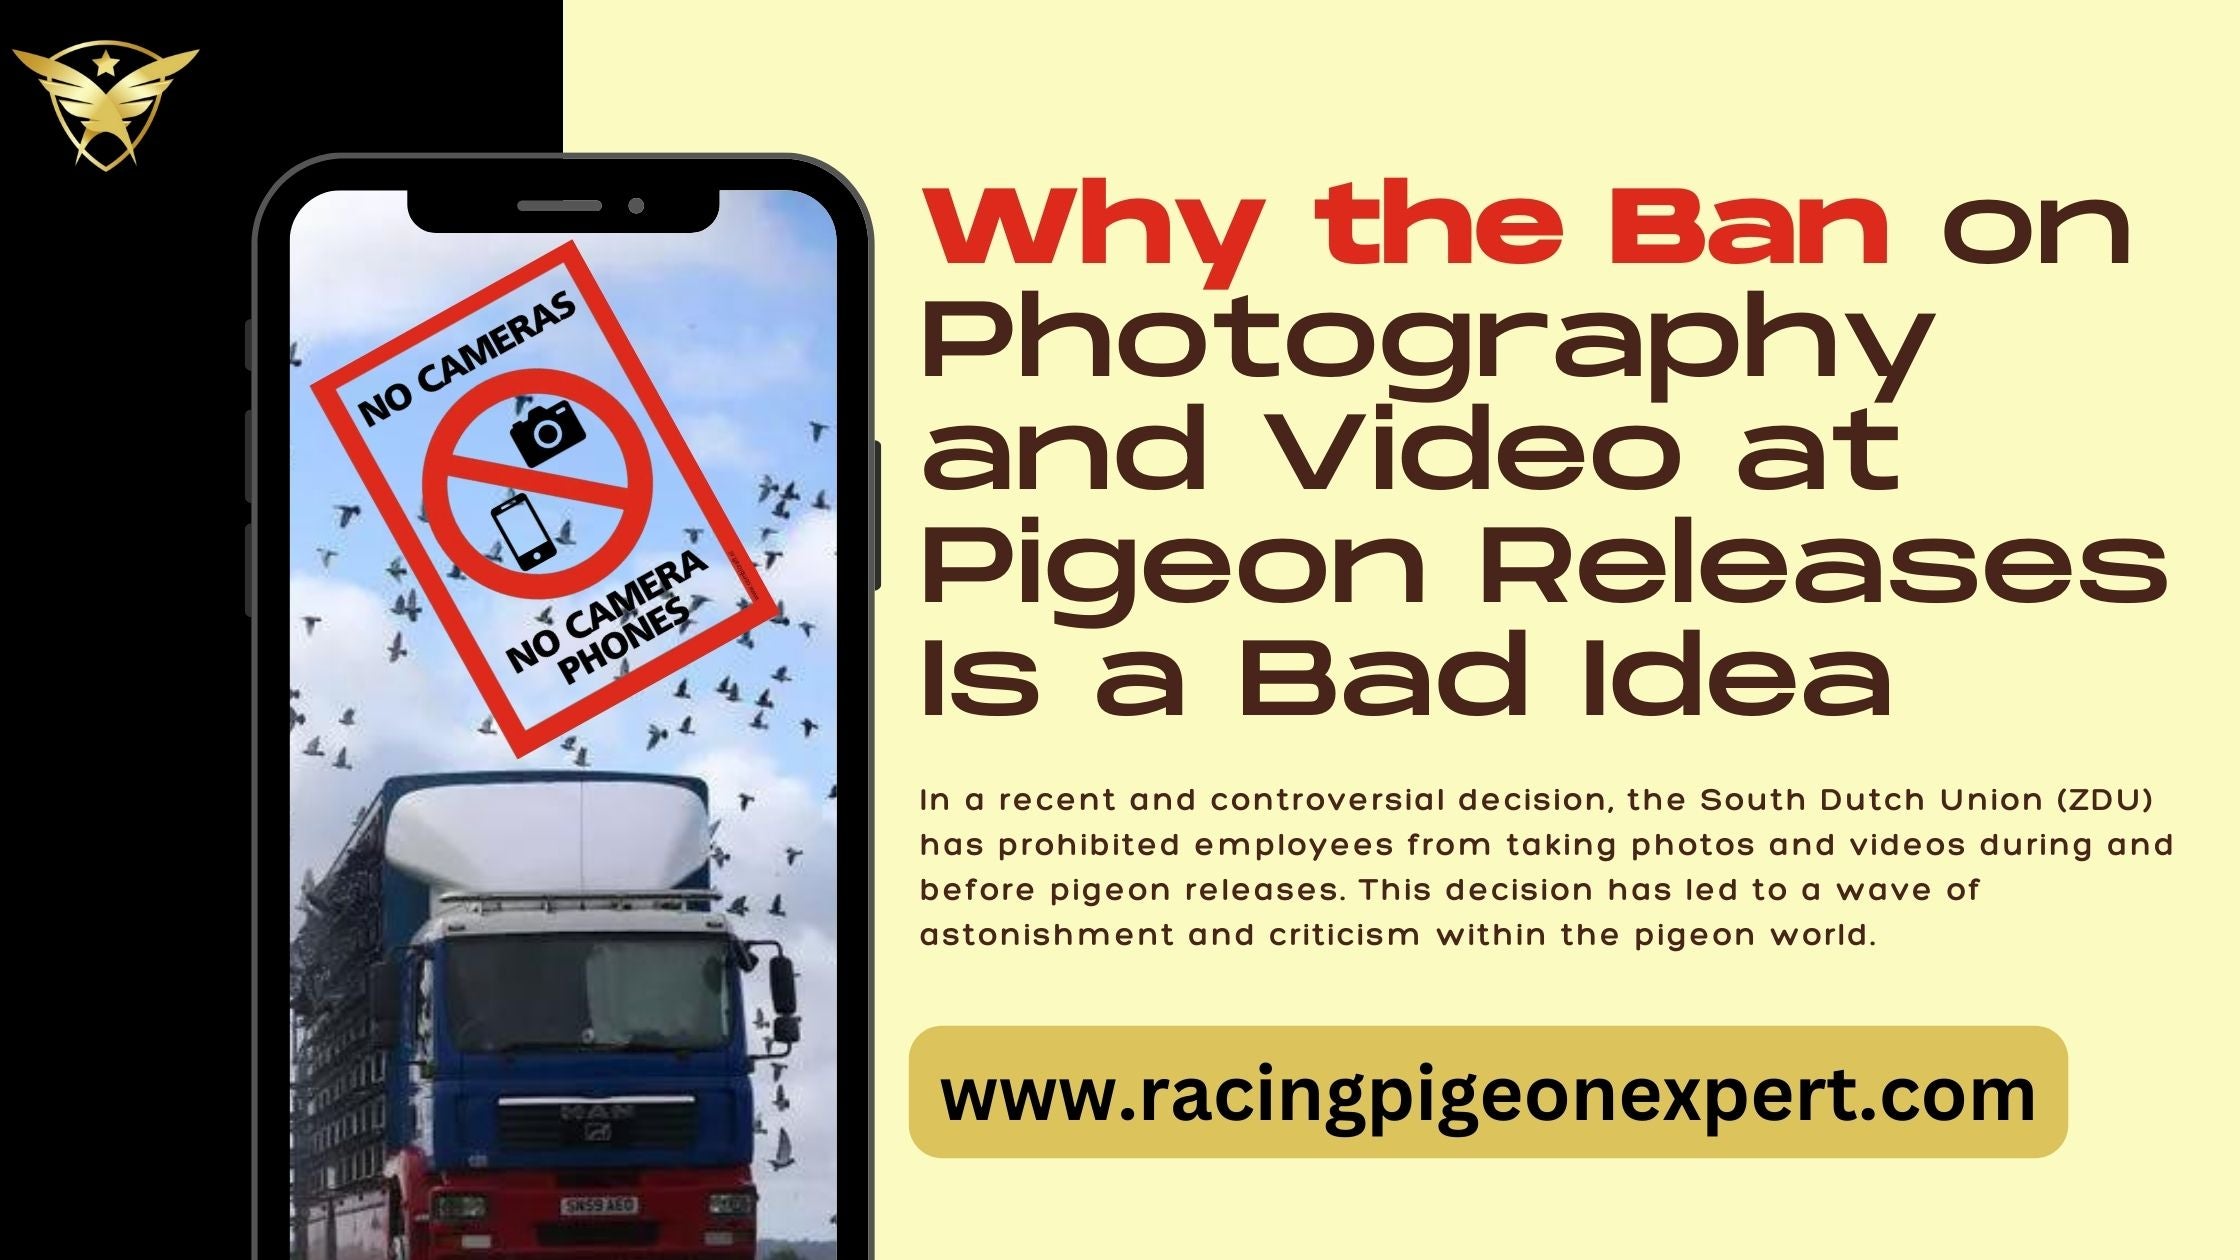 Why the Ban on Photography and Video at Pigeon Releases Is a Bad Idea